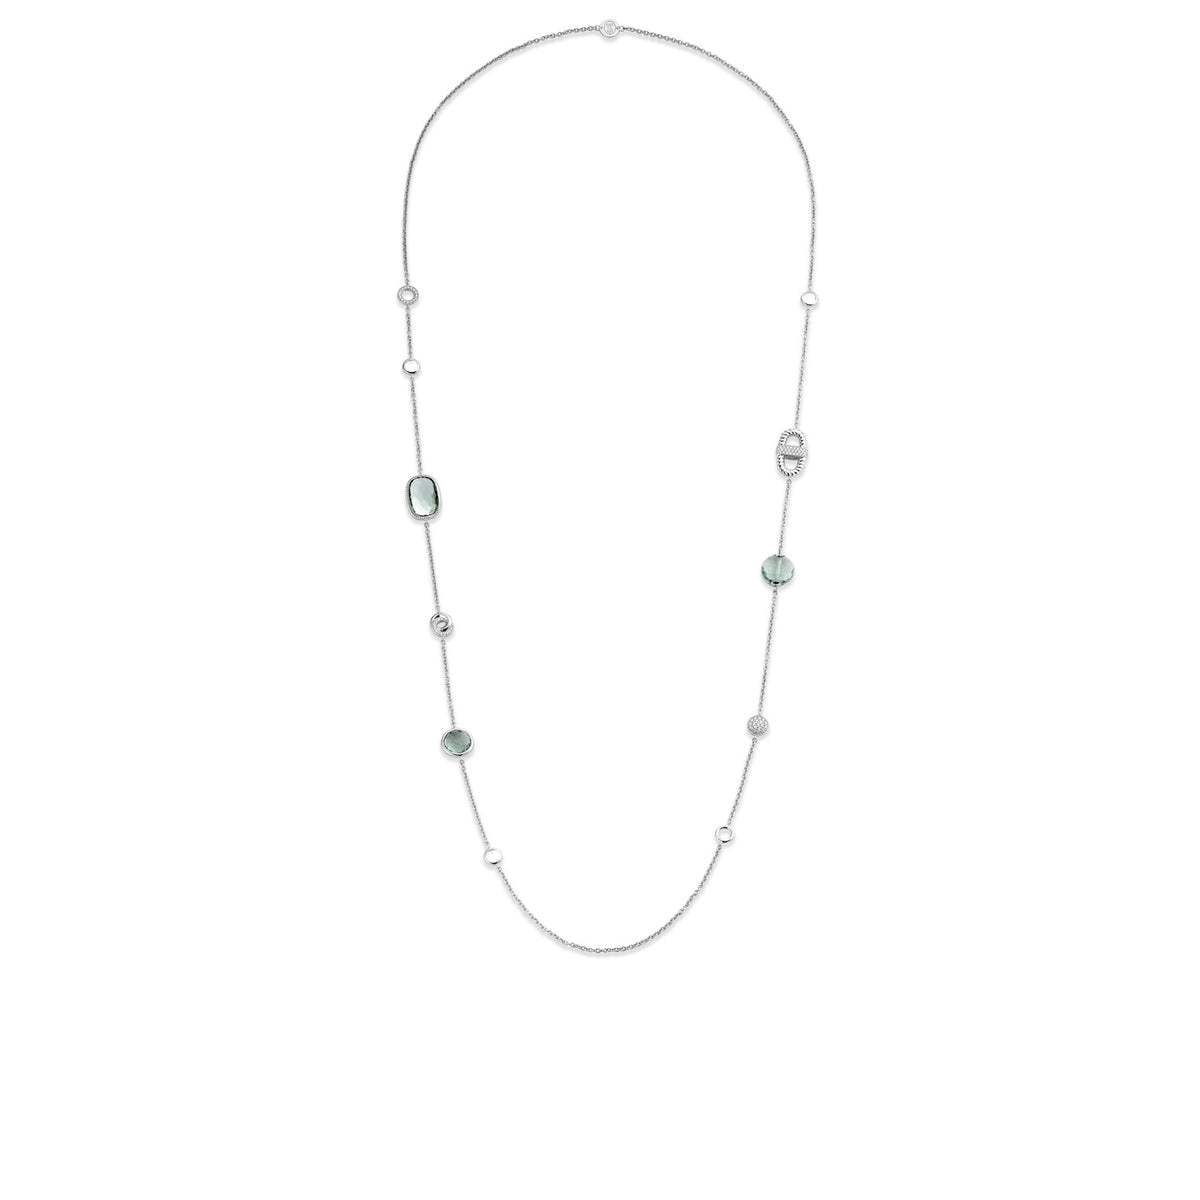 TI SENTO Sterling Silver Station Necklace with Cubic Zirconia and Green Stones